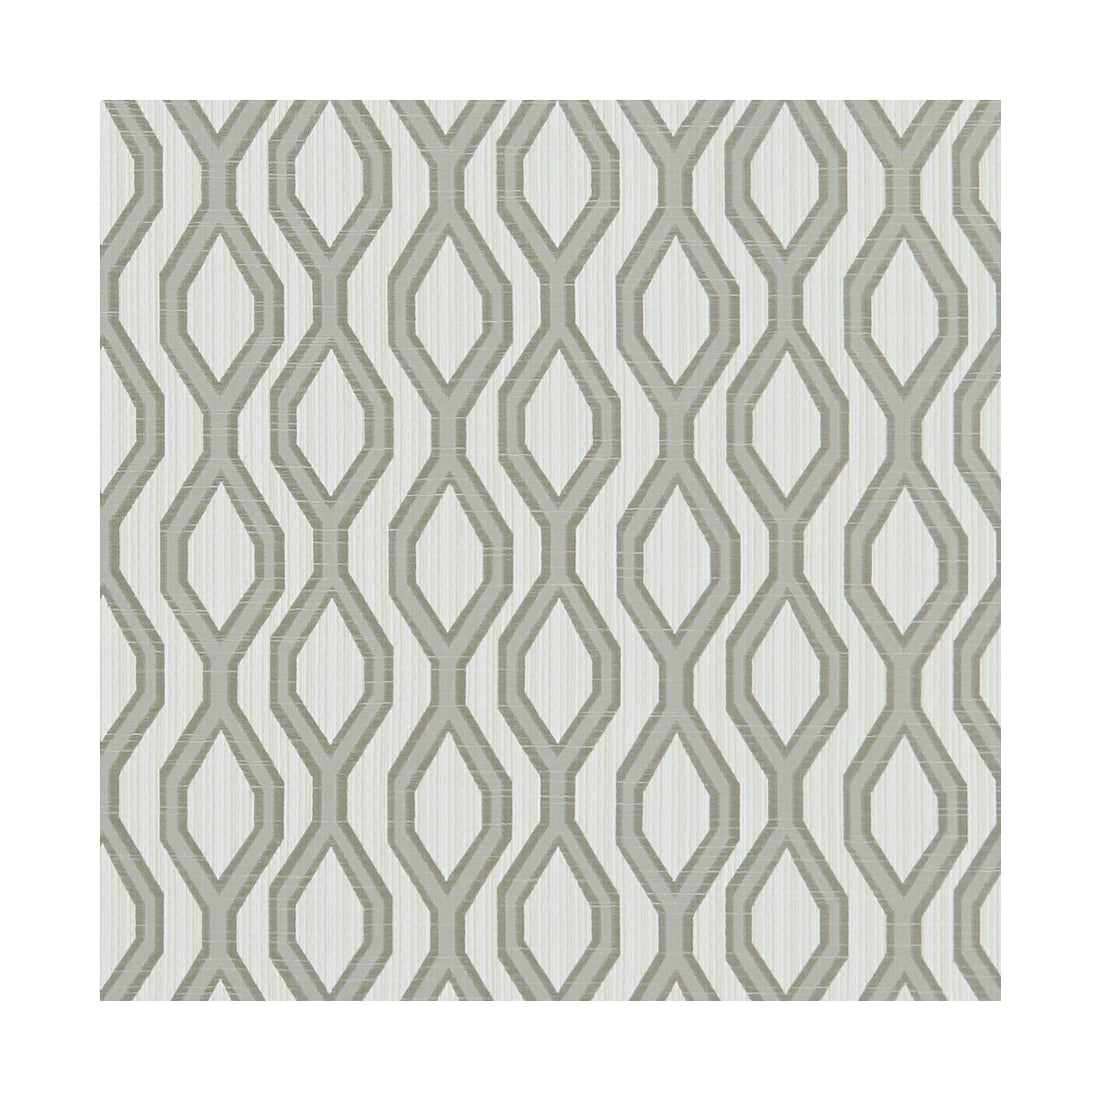 Hadley fabric in taupe color - pattern F1237/08.CAC.0 - by Clarke And Clarke in the Marbury By Studio G For C&amp;C collection